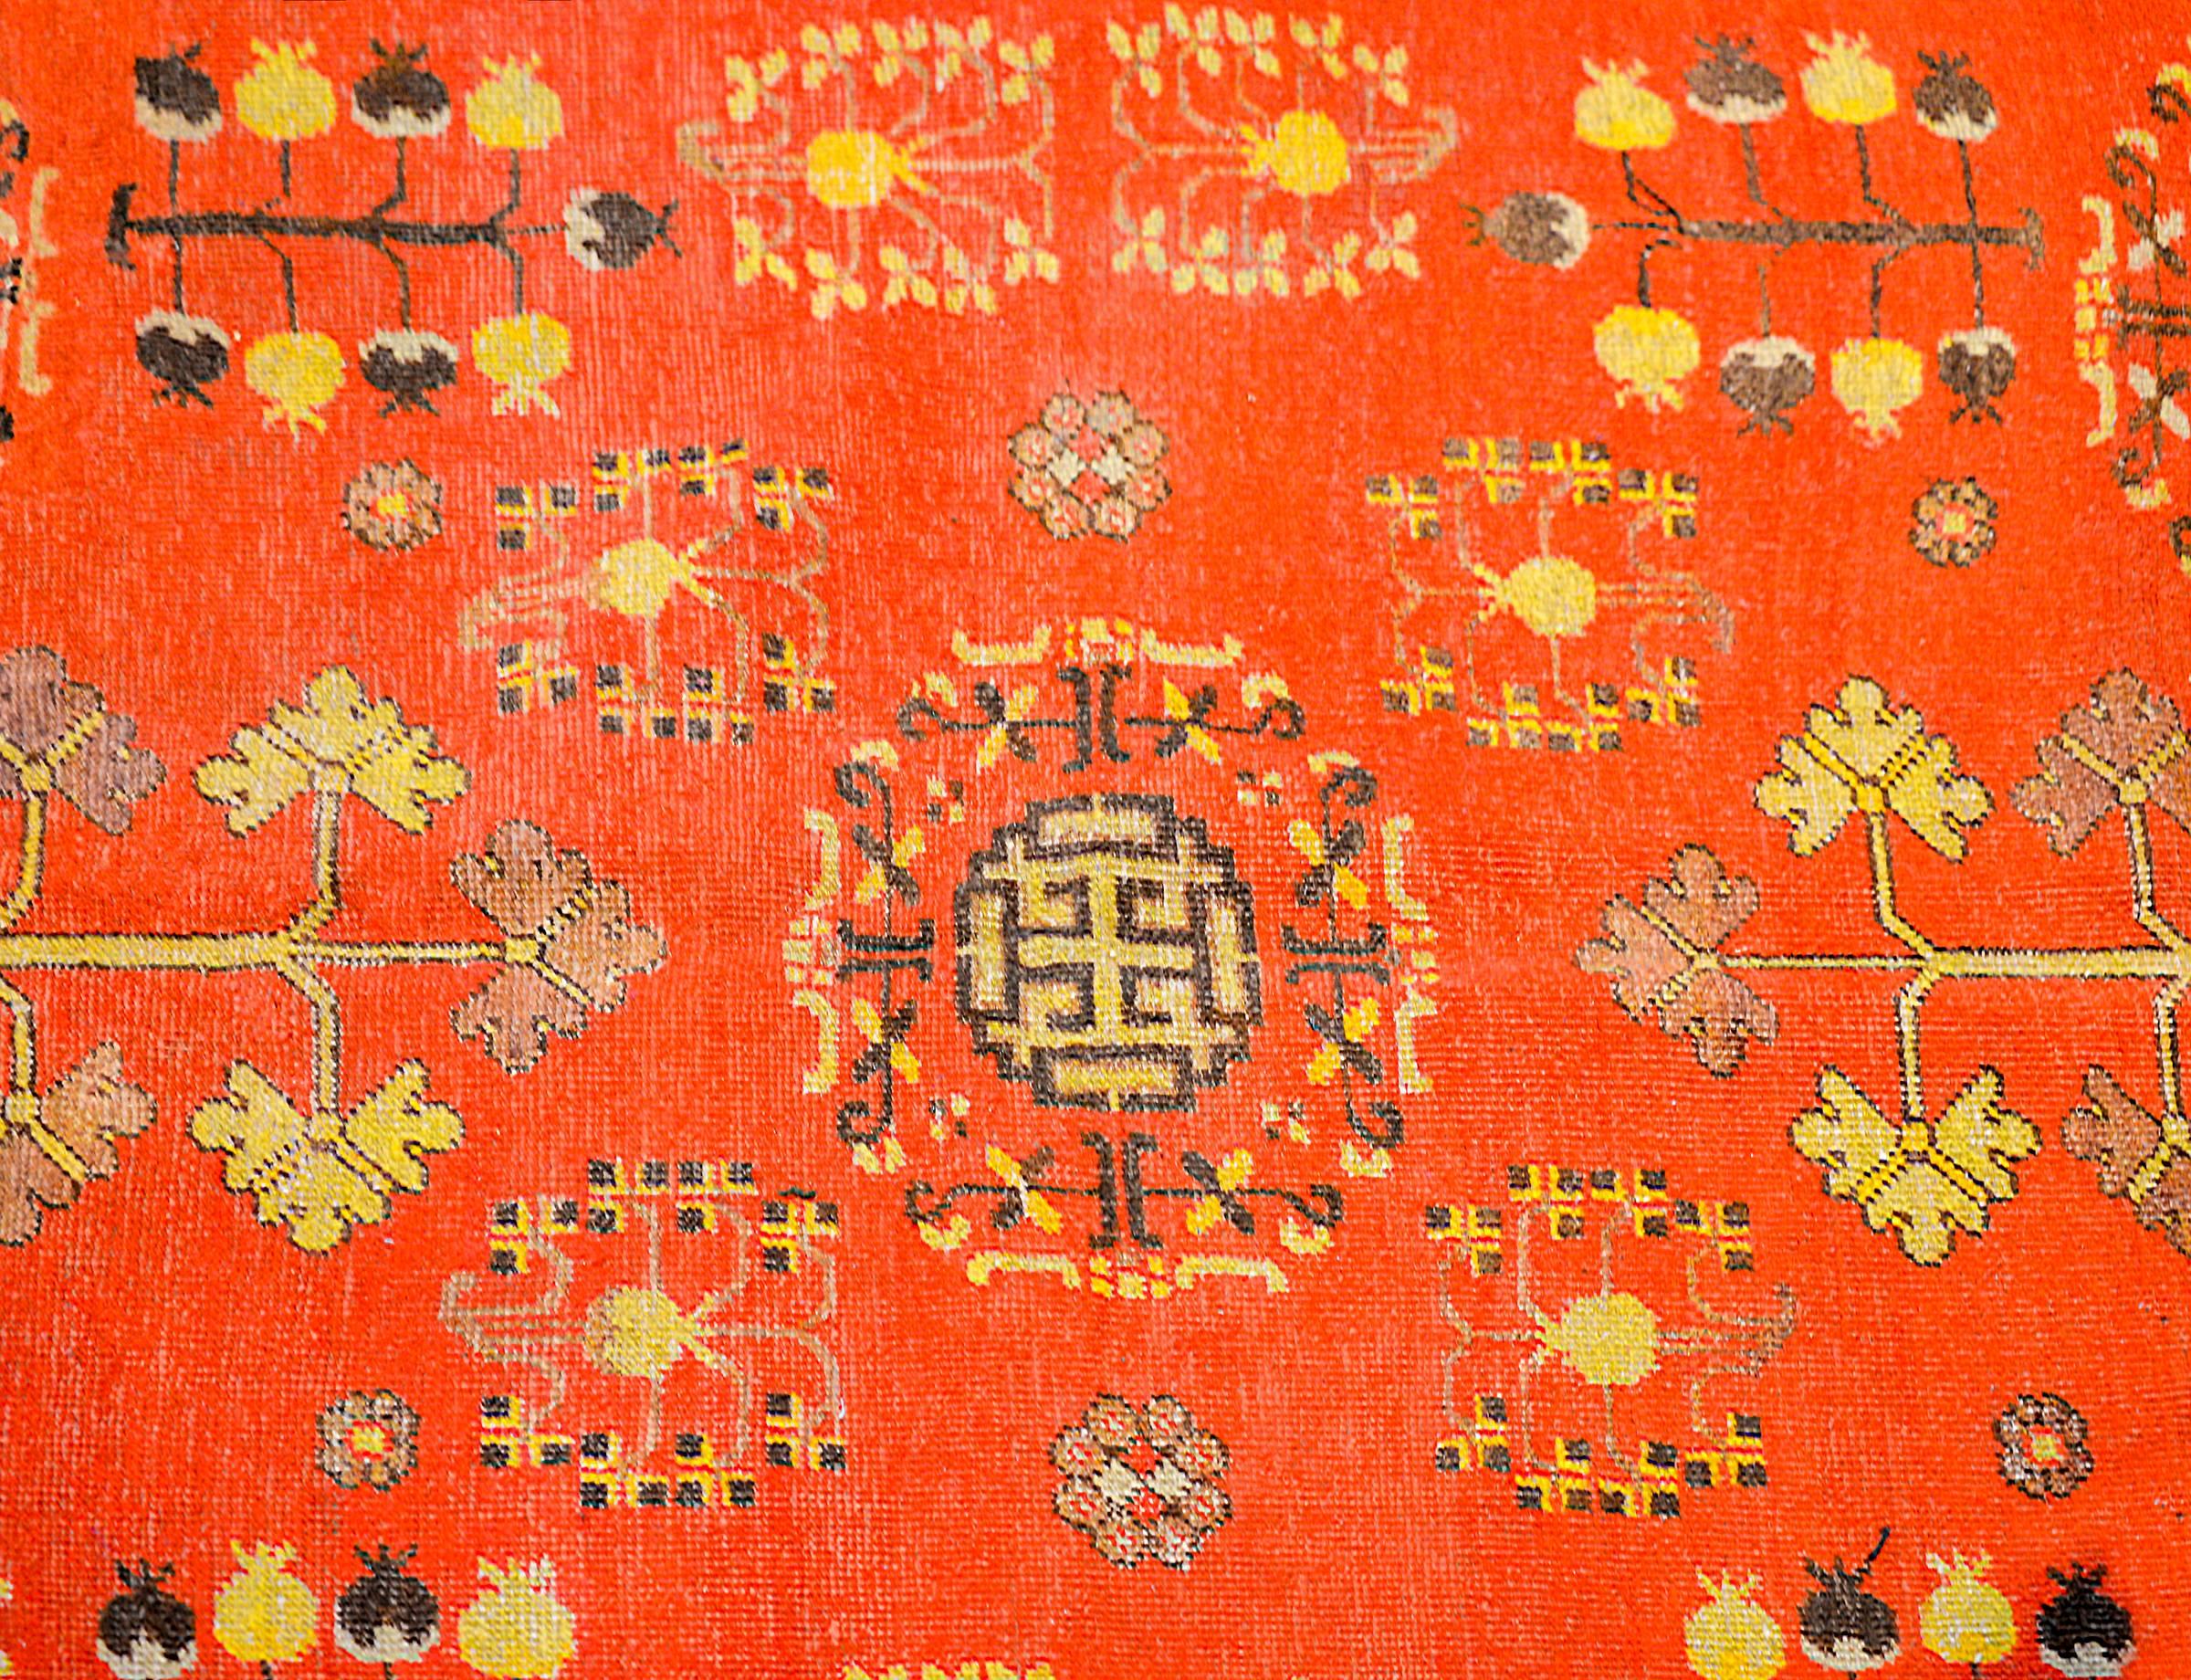 A beautiful early 20th century Central Asian Khotan rug with a rich crimson field of pomegranate, trees-of-life, and floral patterns. The border is wonderfully rendered consisting of a Buddhist meandering motif pattern and a turbulent cloud motif,